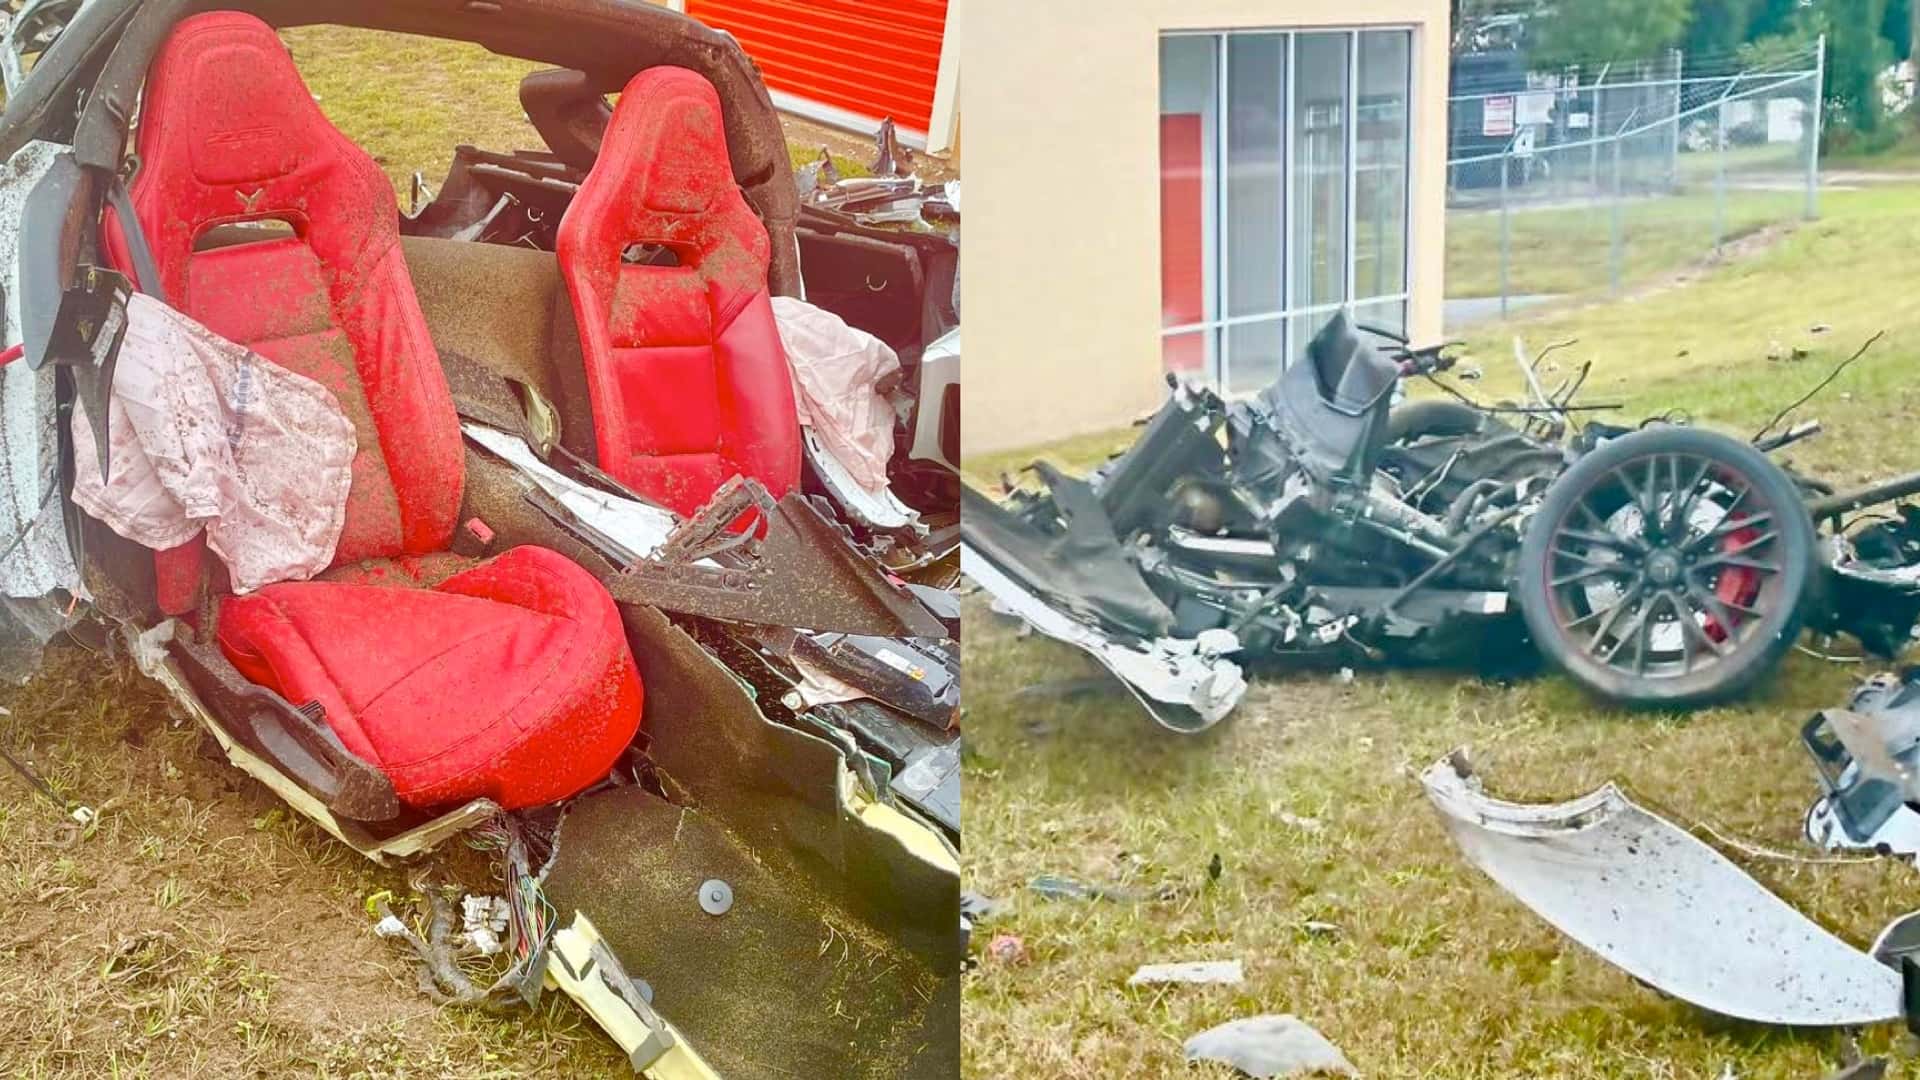 florida man ejected from corvette after street racing crash, somehow survives